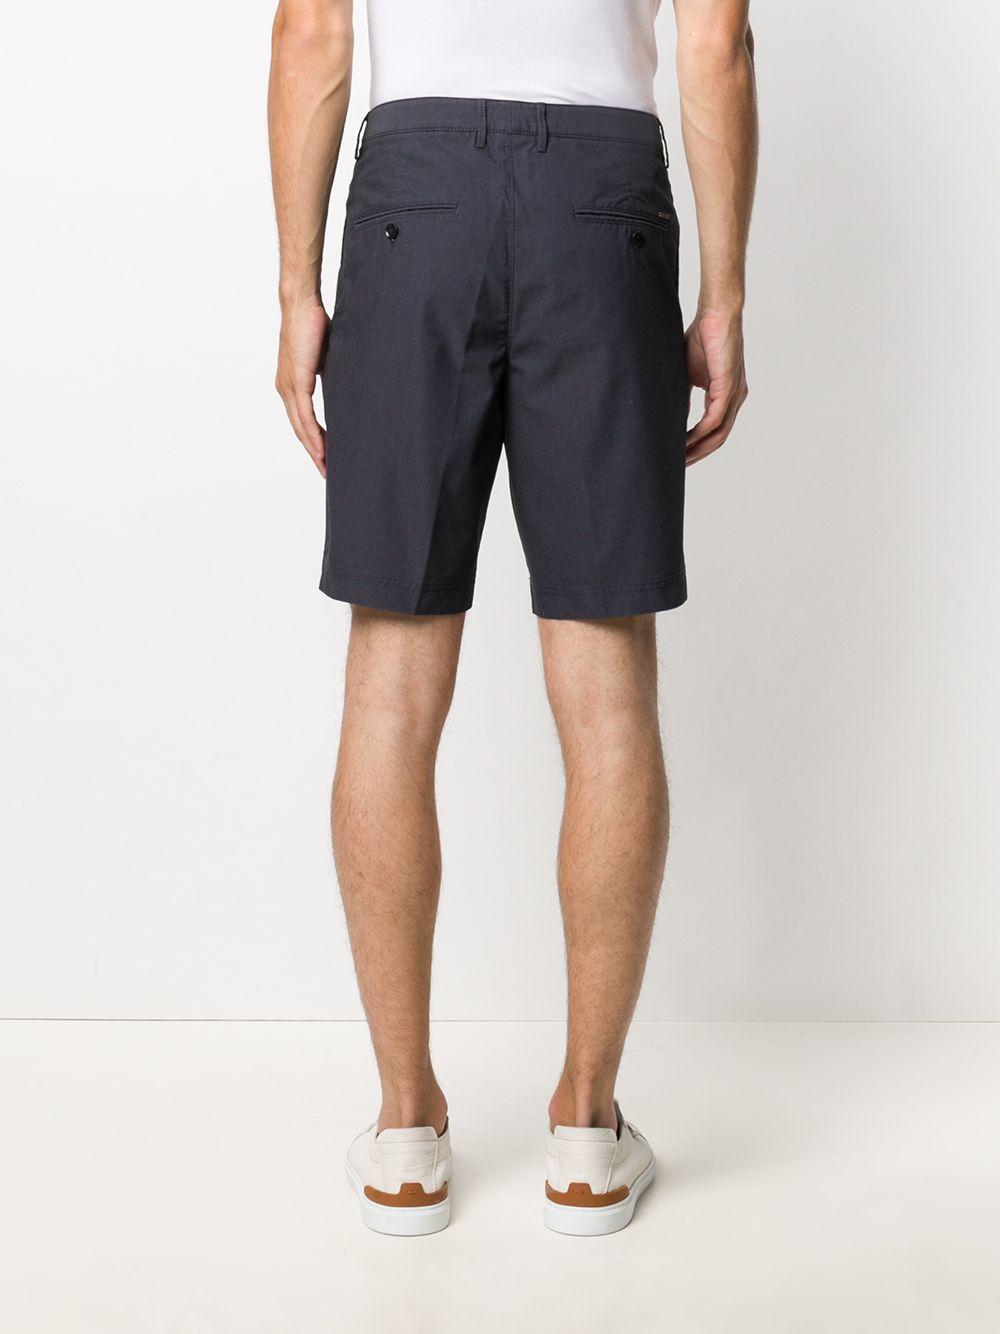 BOSS by Hugo Boss Cotton Chino Shorts in Blue for Men - Lyst